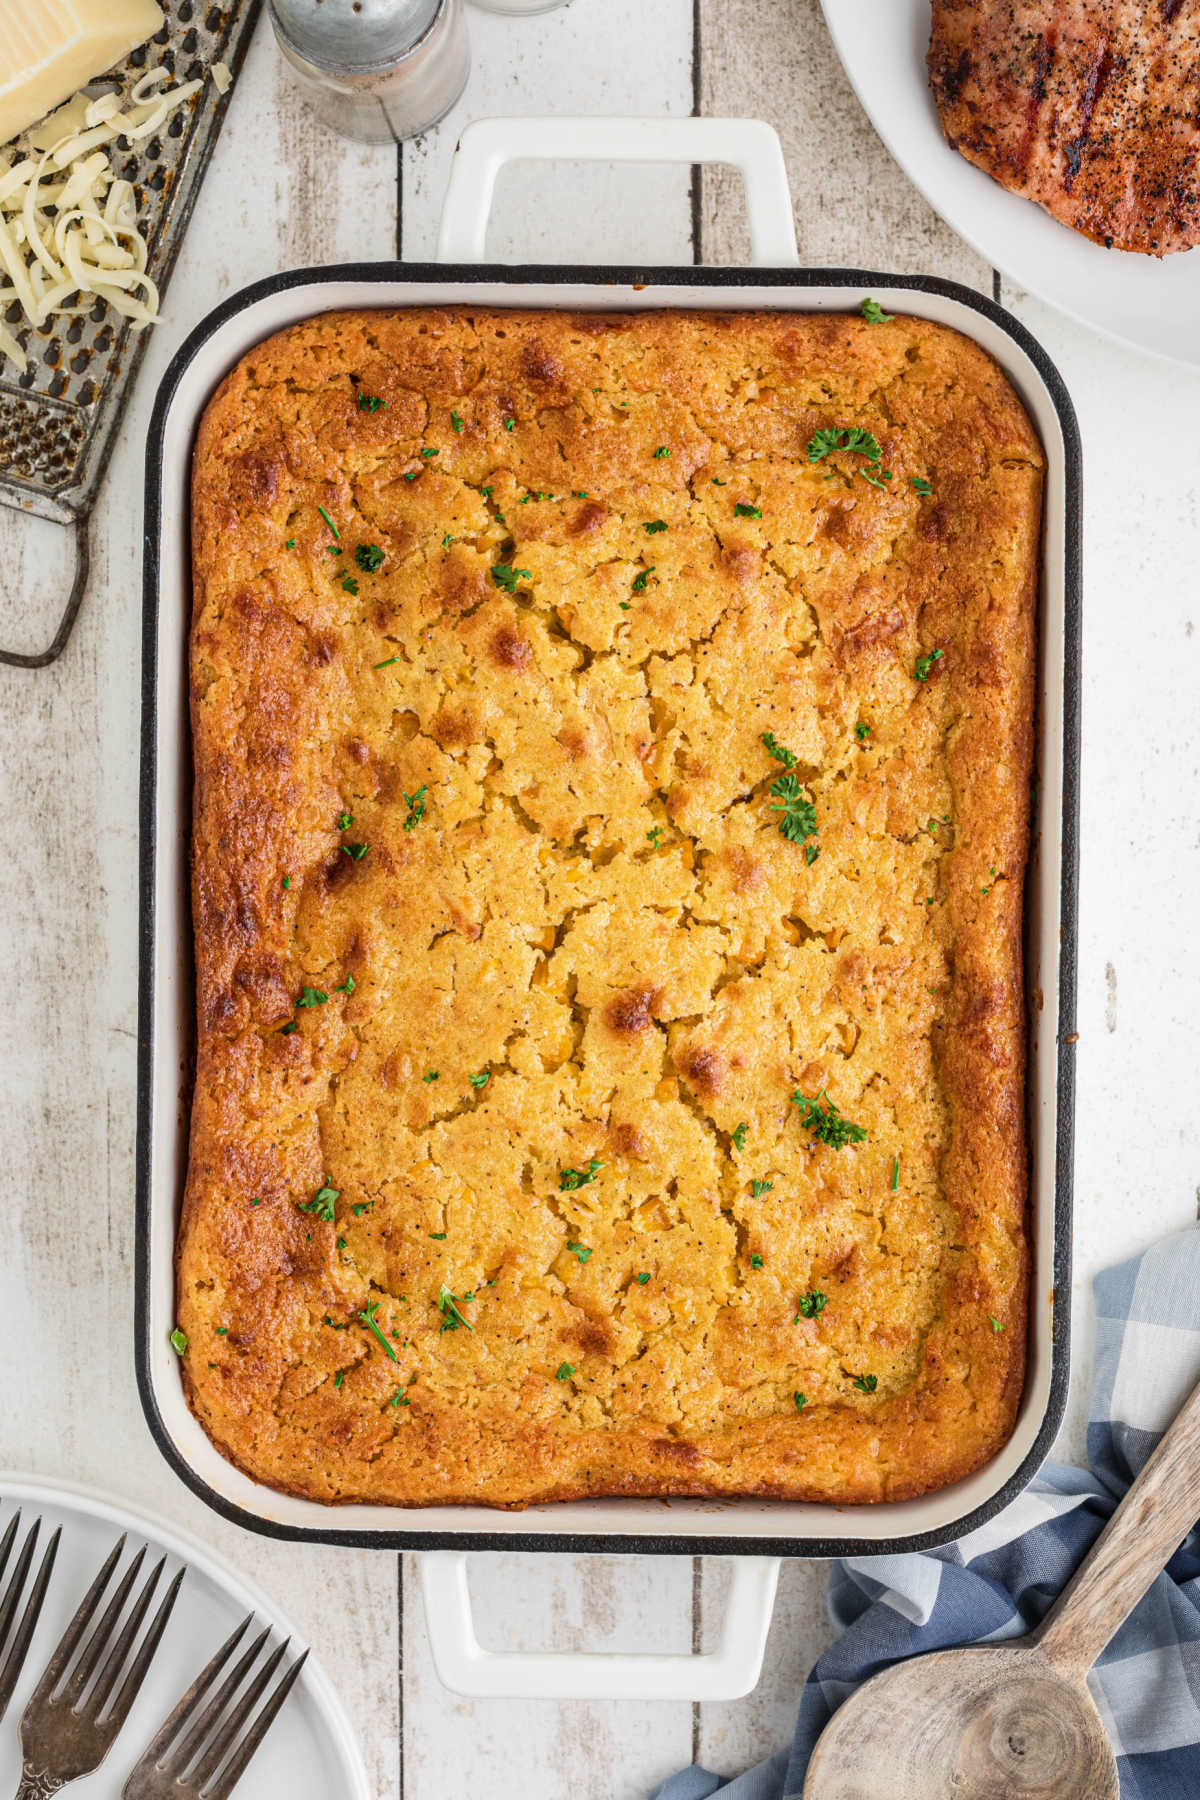 Overhead view of a dish of cornbread pudding.